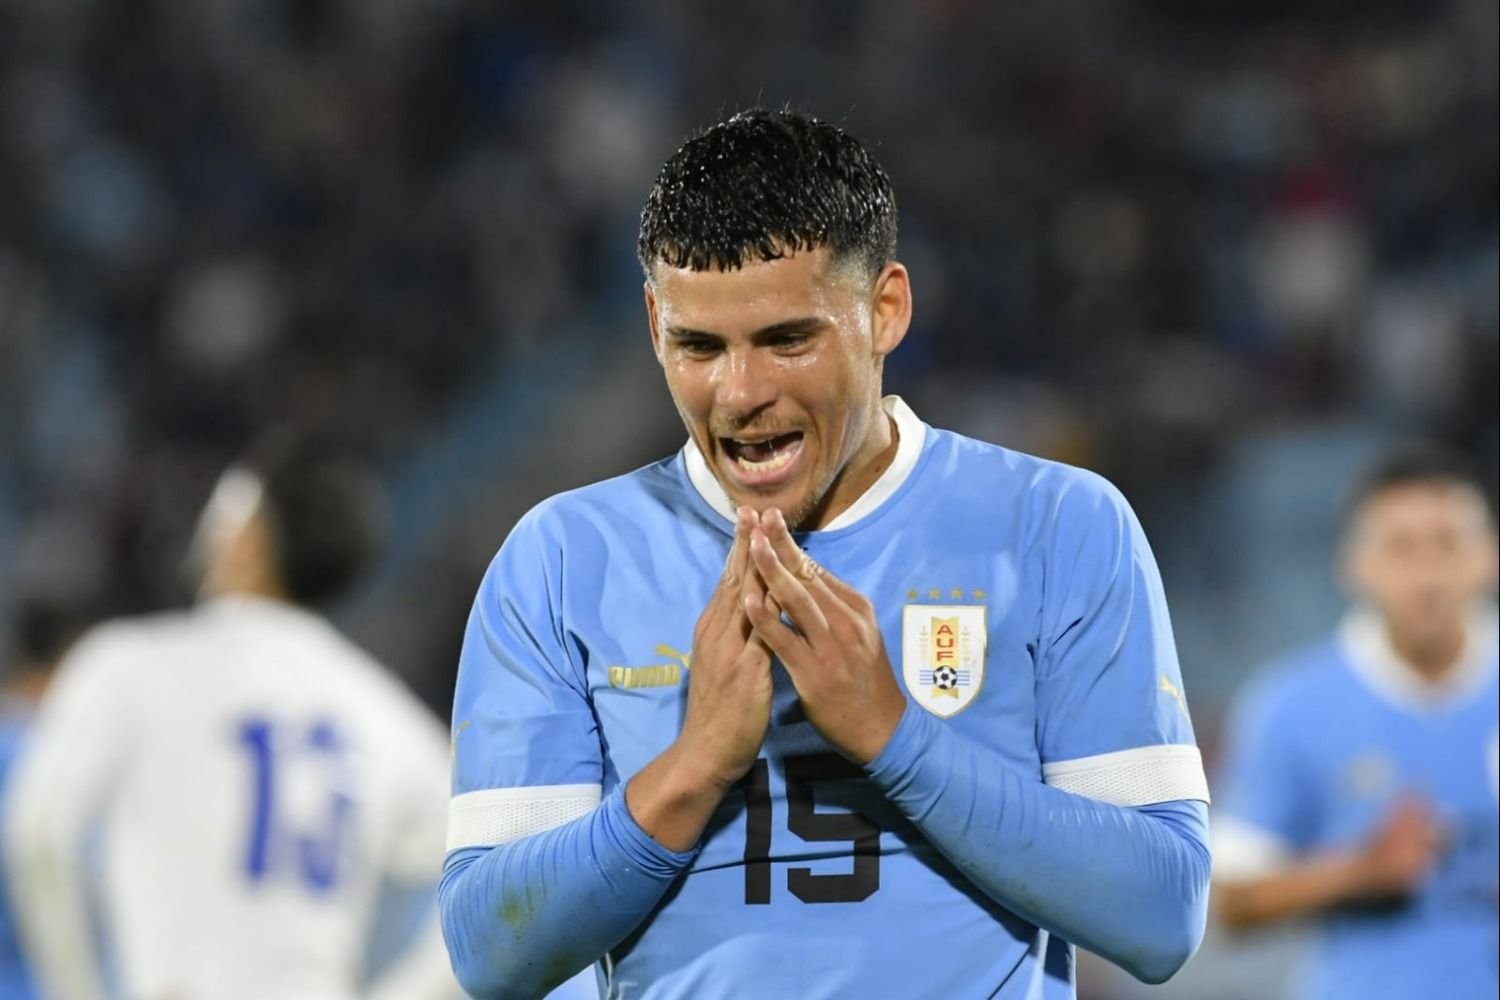  Maximiliano Araujo, a Uruguayan soccer player, wearing the national team's blue jersey with the number 19, celebrates a goal with his hands together in front of his mouth.